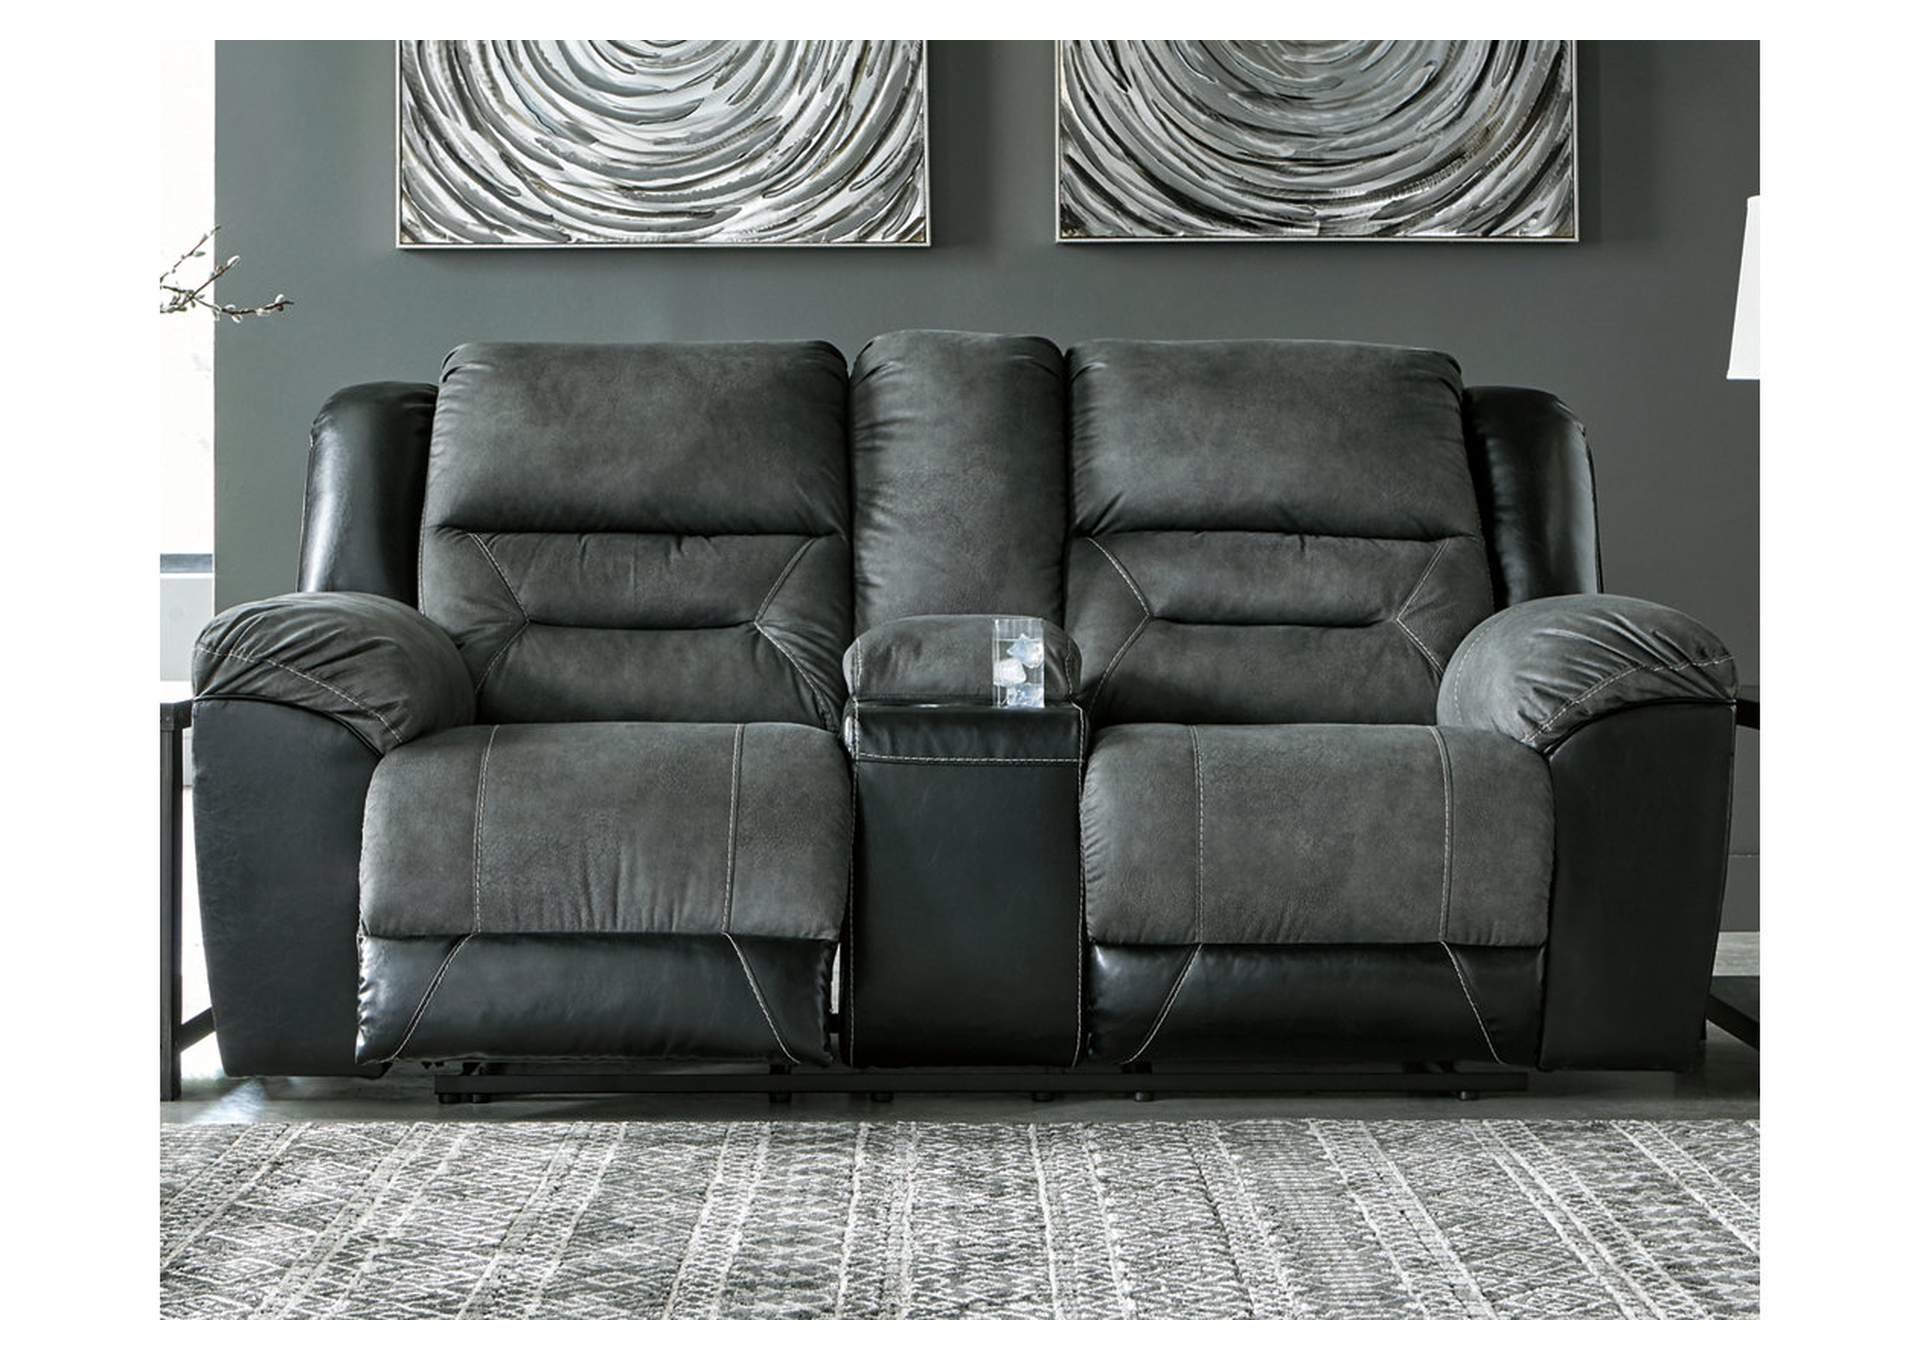 Earhart Sofa, Loveseat and Recliner,Signature Design By Ashley